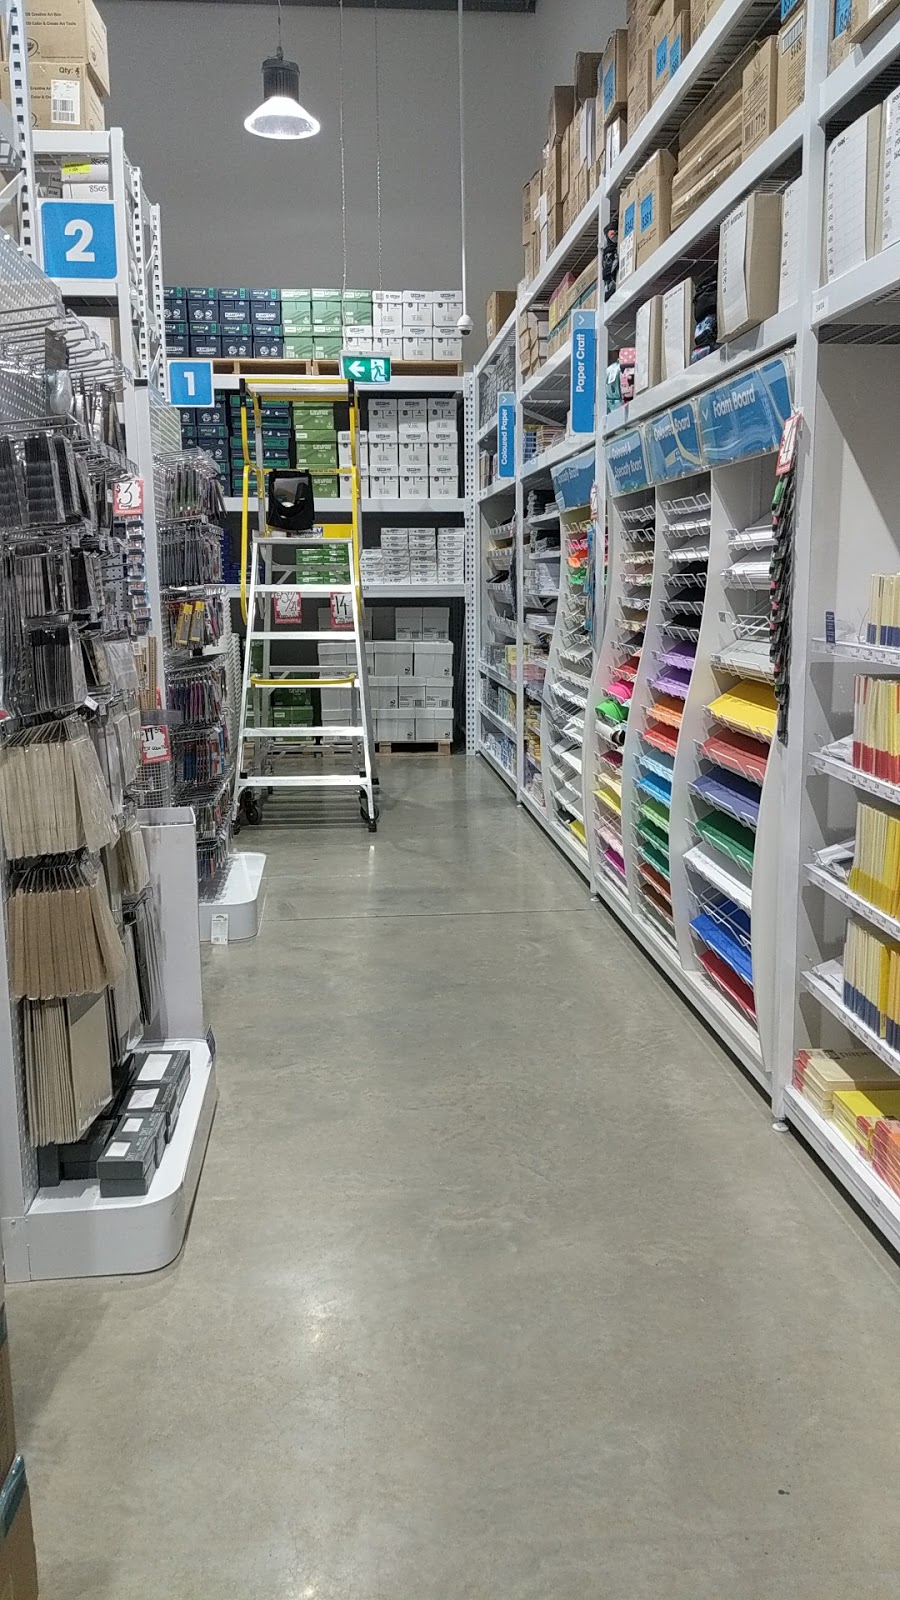 Officeworks Mulgrave | furniture store | 6 Industry Rd, Mulgrave NSW 2756, Australia | 0245749400 OR +61 2 4574 9400